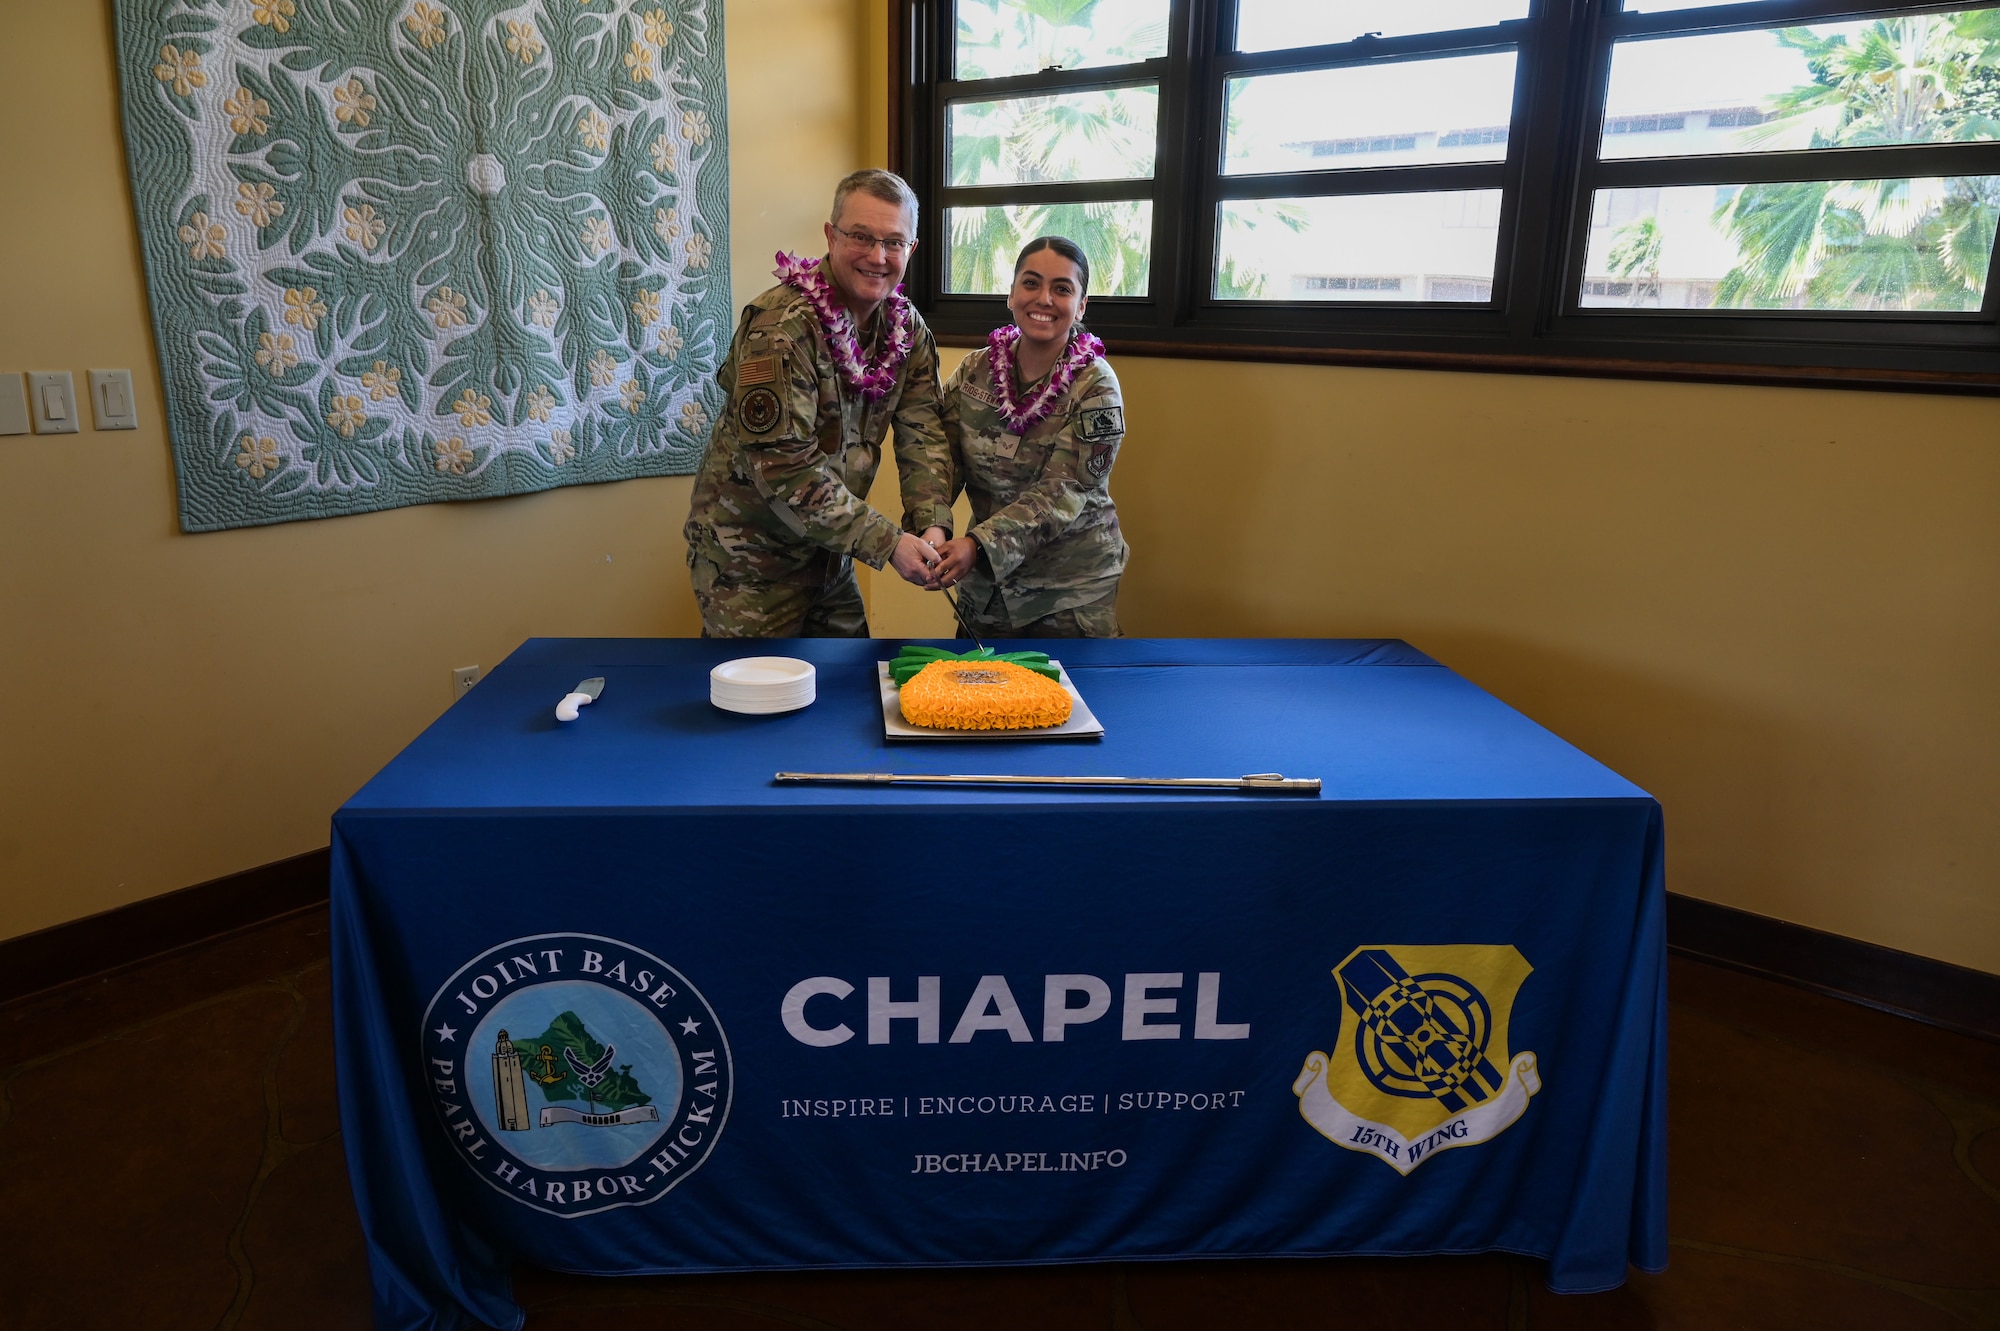 Maj. Gen. Randall Kitchens, U.S Air Force Chief of Chaplains, and Senior Airman Maribel Rios-Stewart, 647th Air Base Group religious affairs journeyman, cut a cake together during a 75th Chaplain Corp Anniversary celebration at Joint Base Pearl Harbor-Hickam, Hawaii, April 23, 2024. It’s an Air Force tradition for the lowest and highest ranking Airman to cut the cake together. Kitchens later passed a slice of cake to Rios-Stewart to symbolize the passing of knowledge to a younger generation. (U.S. Air Force photo by Staff Sgt. Alan Ricker)